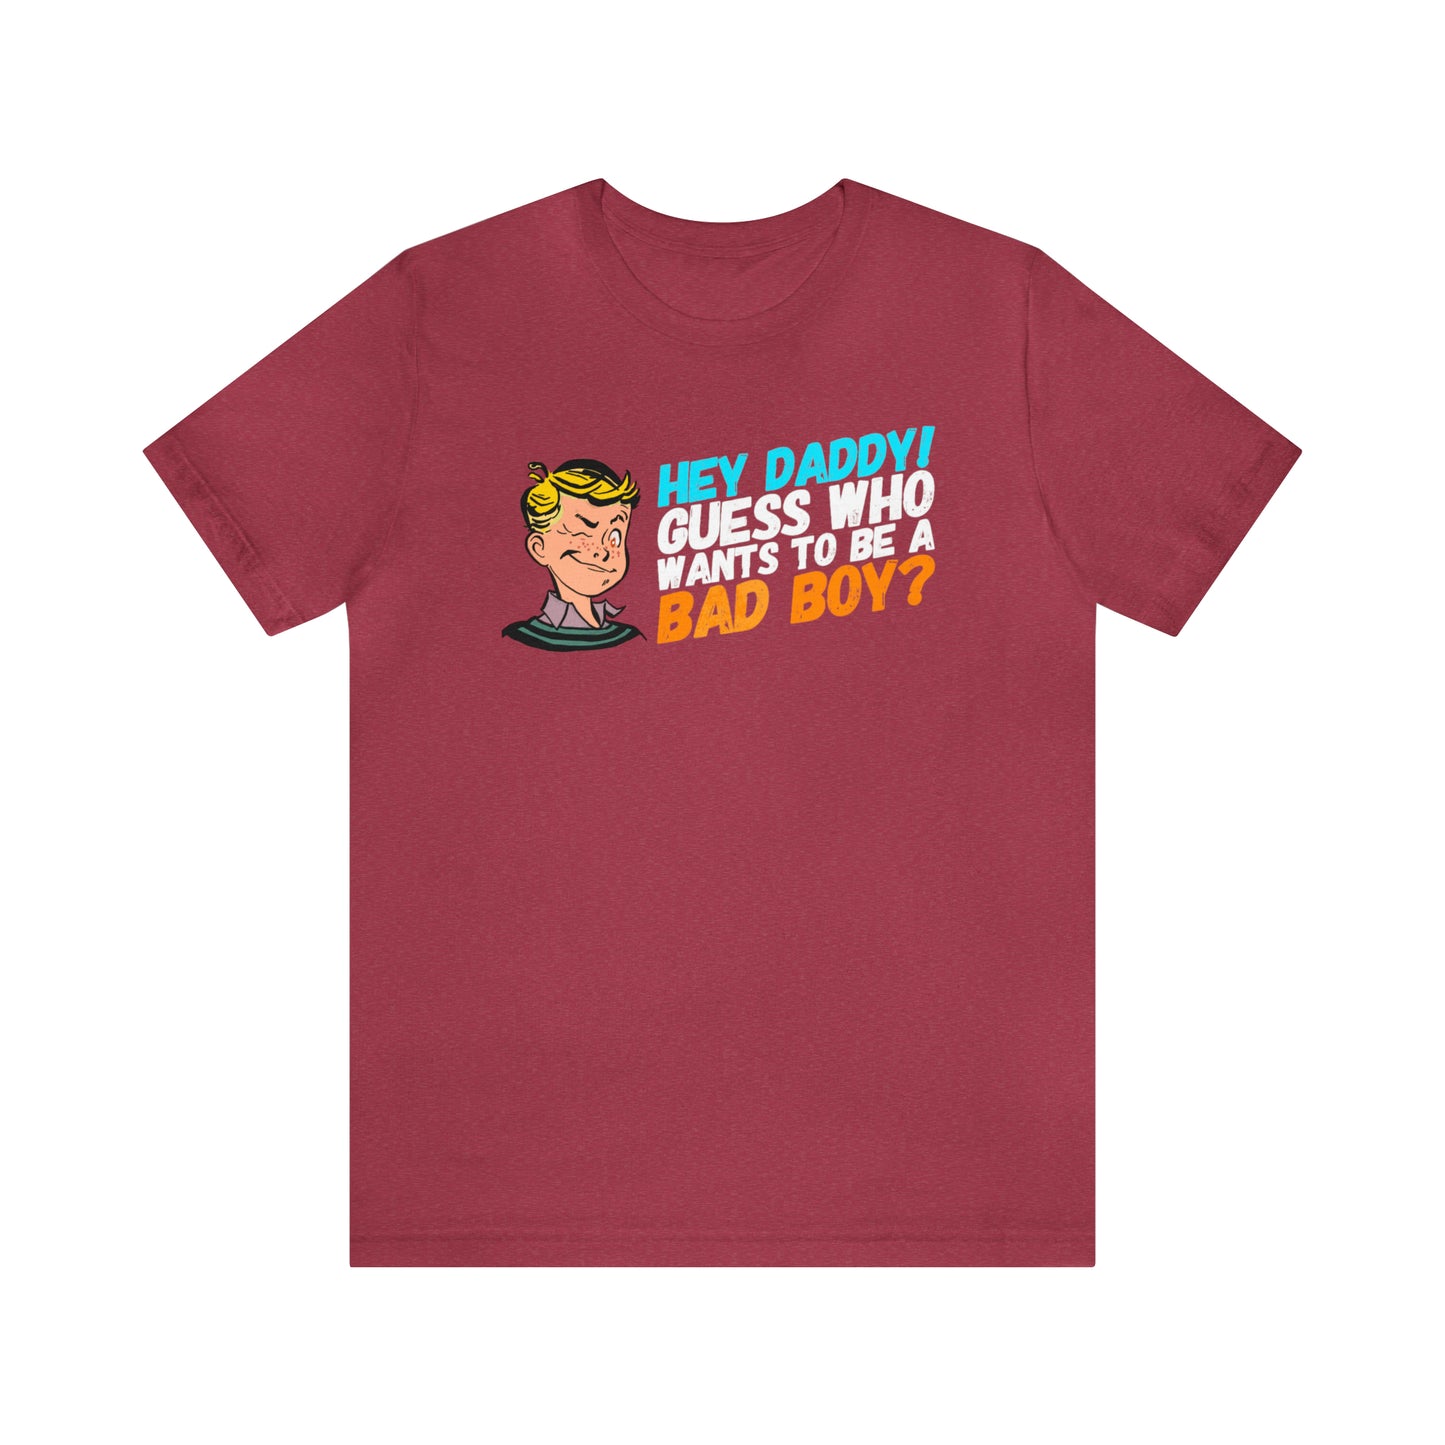 Hey Daddy I Want to be a Bad Boy T-Shirt